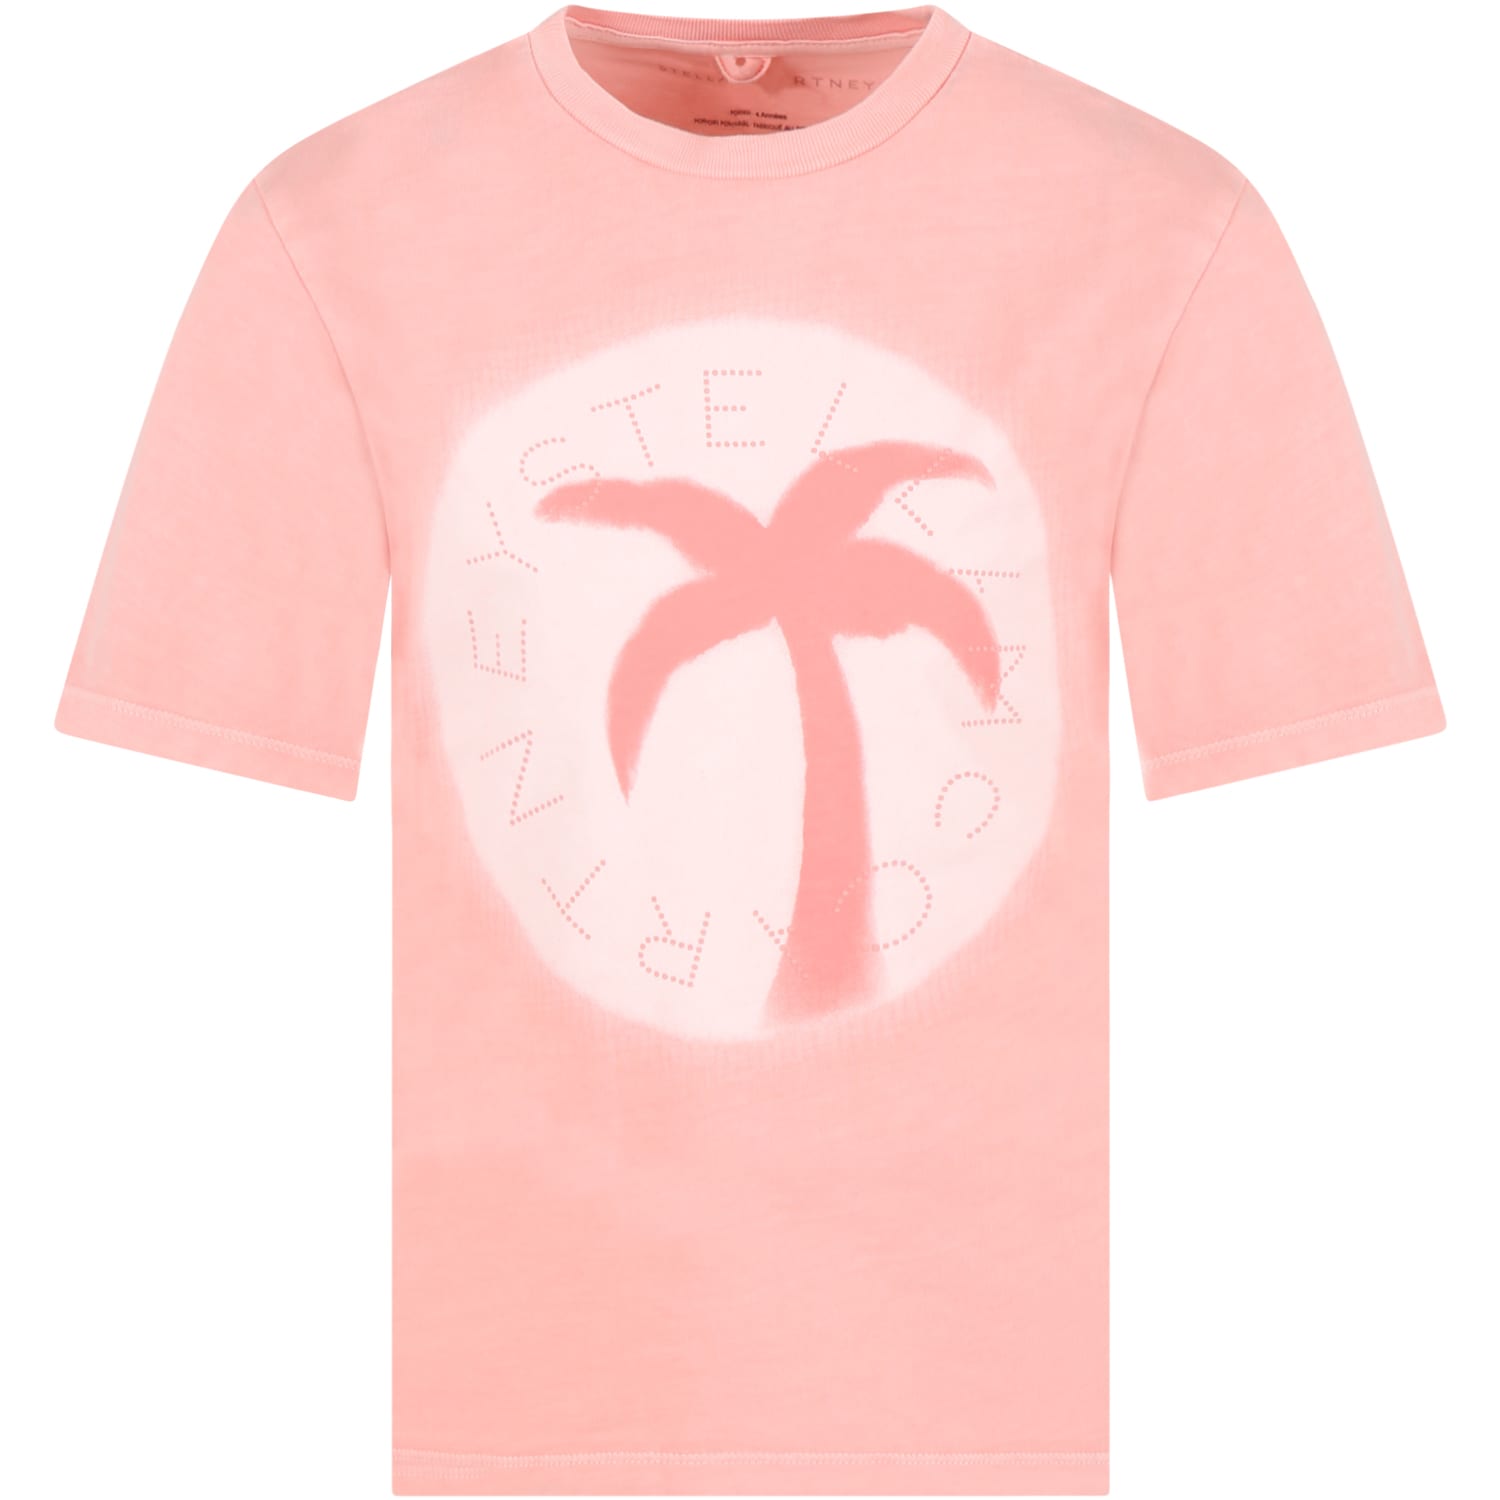 Stella Mccartney PINK T-SHIRT FOR GIRL WITH LOGO